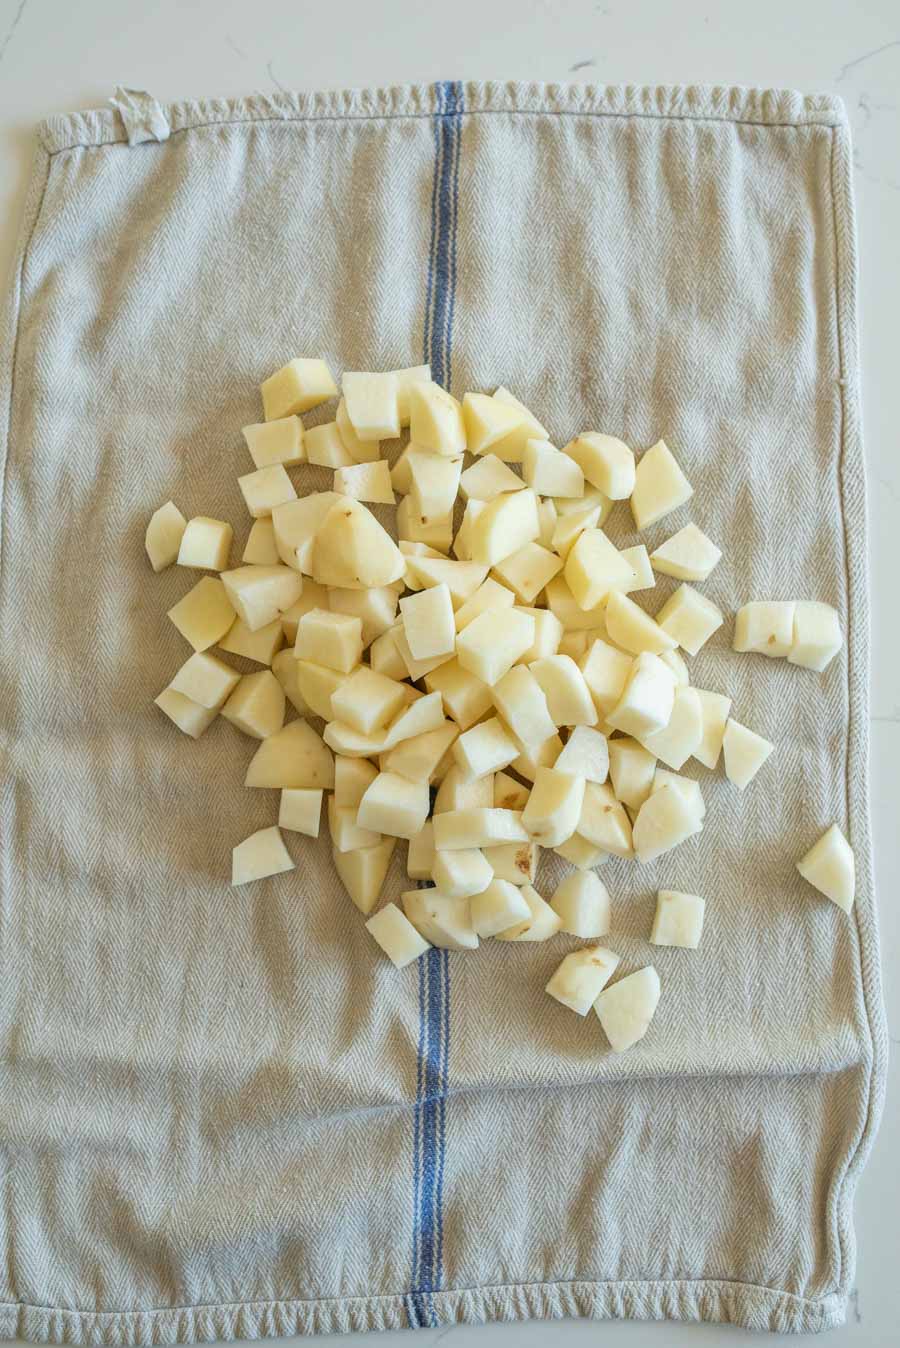 Raw potato cubes on a light grey towel after being dried. 